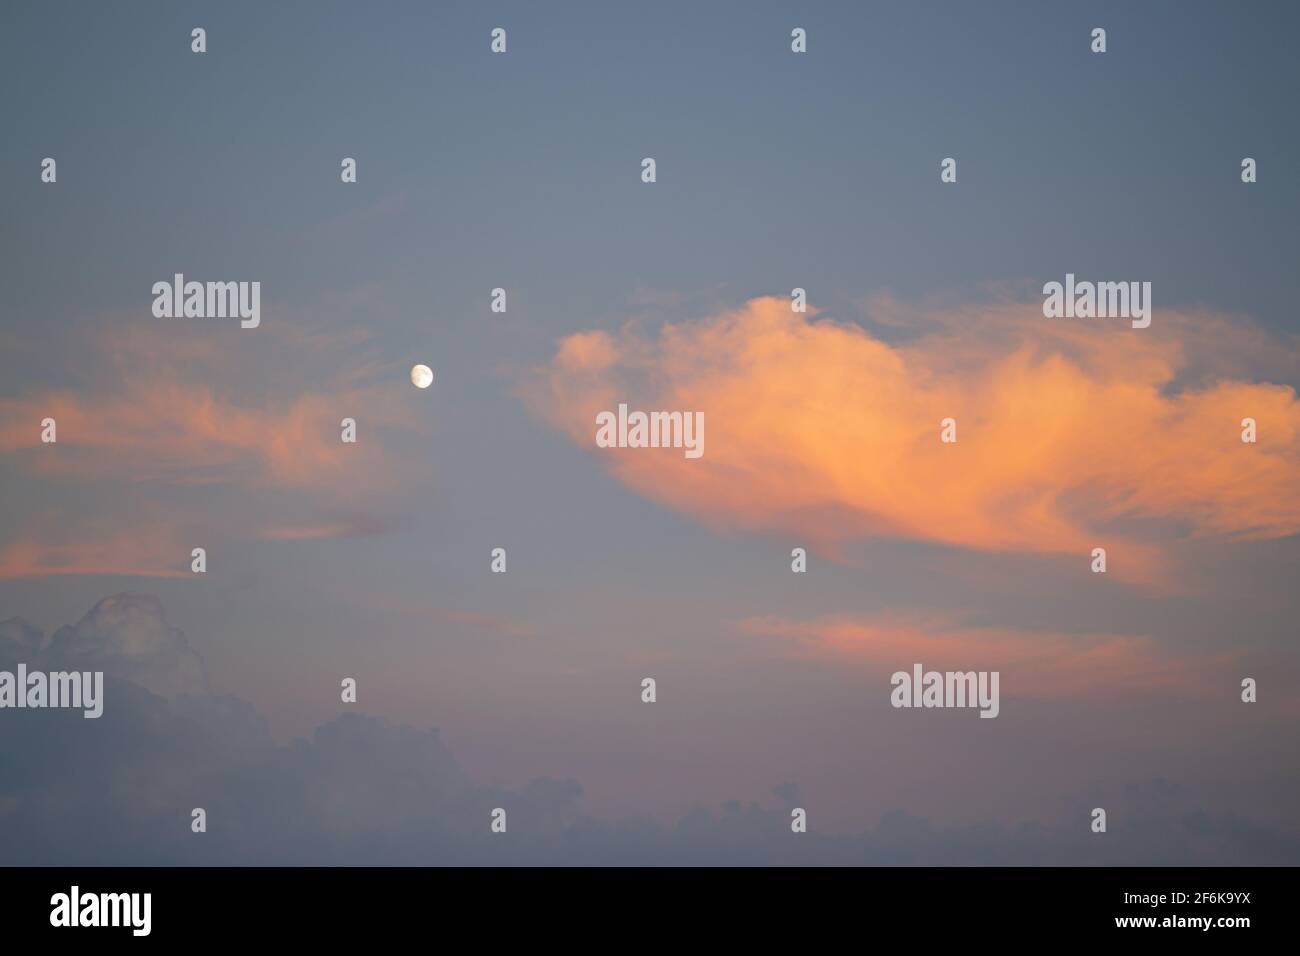 Blue sky and orange clouds. Sunset sky with the moon, the clouds are colored in orange. Stock Photo